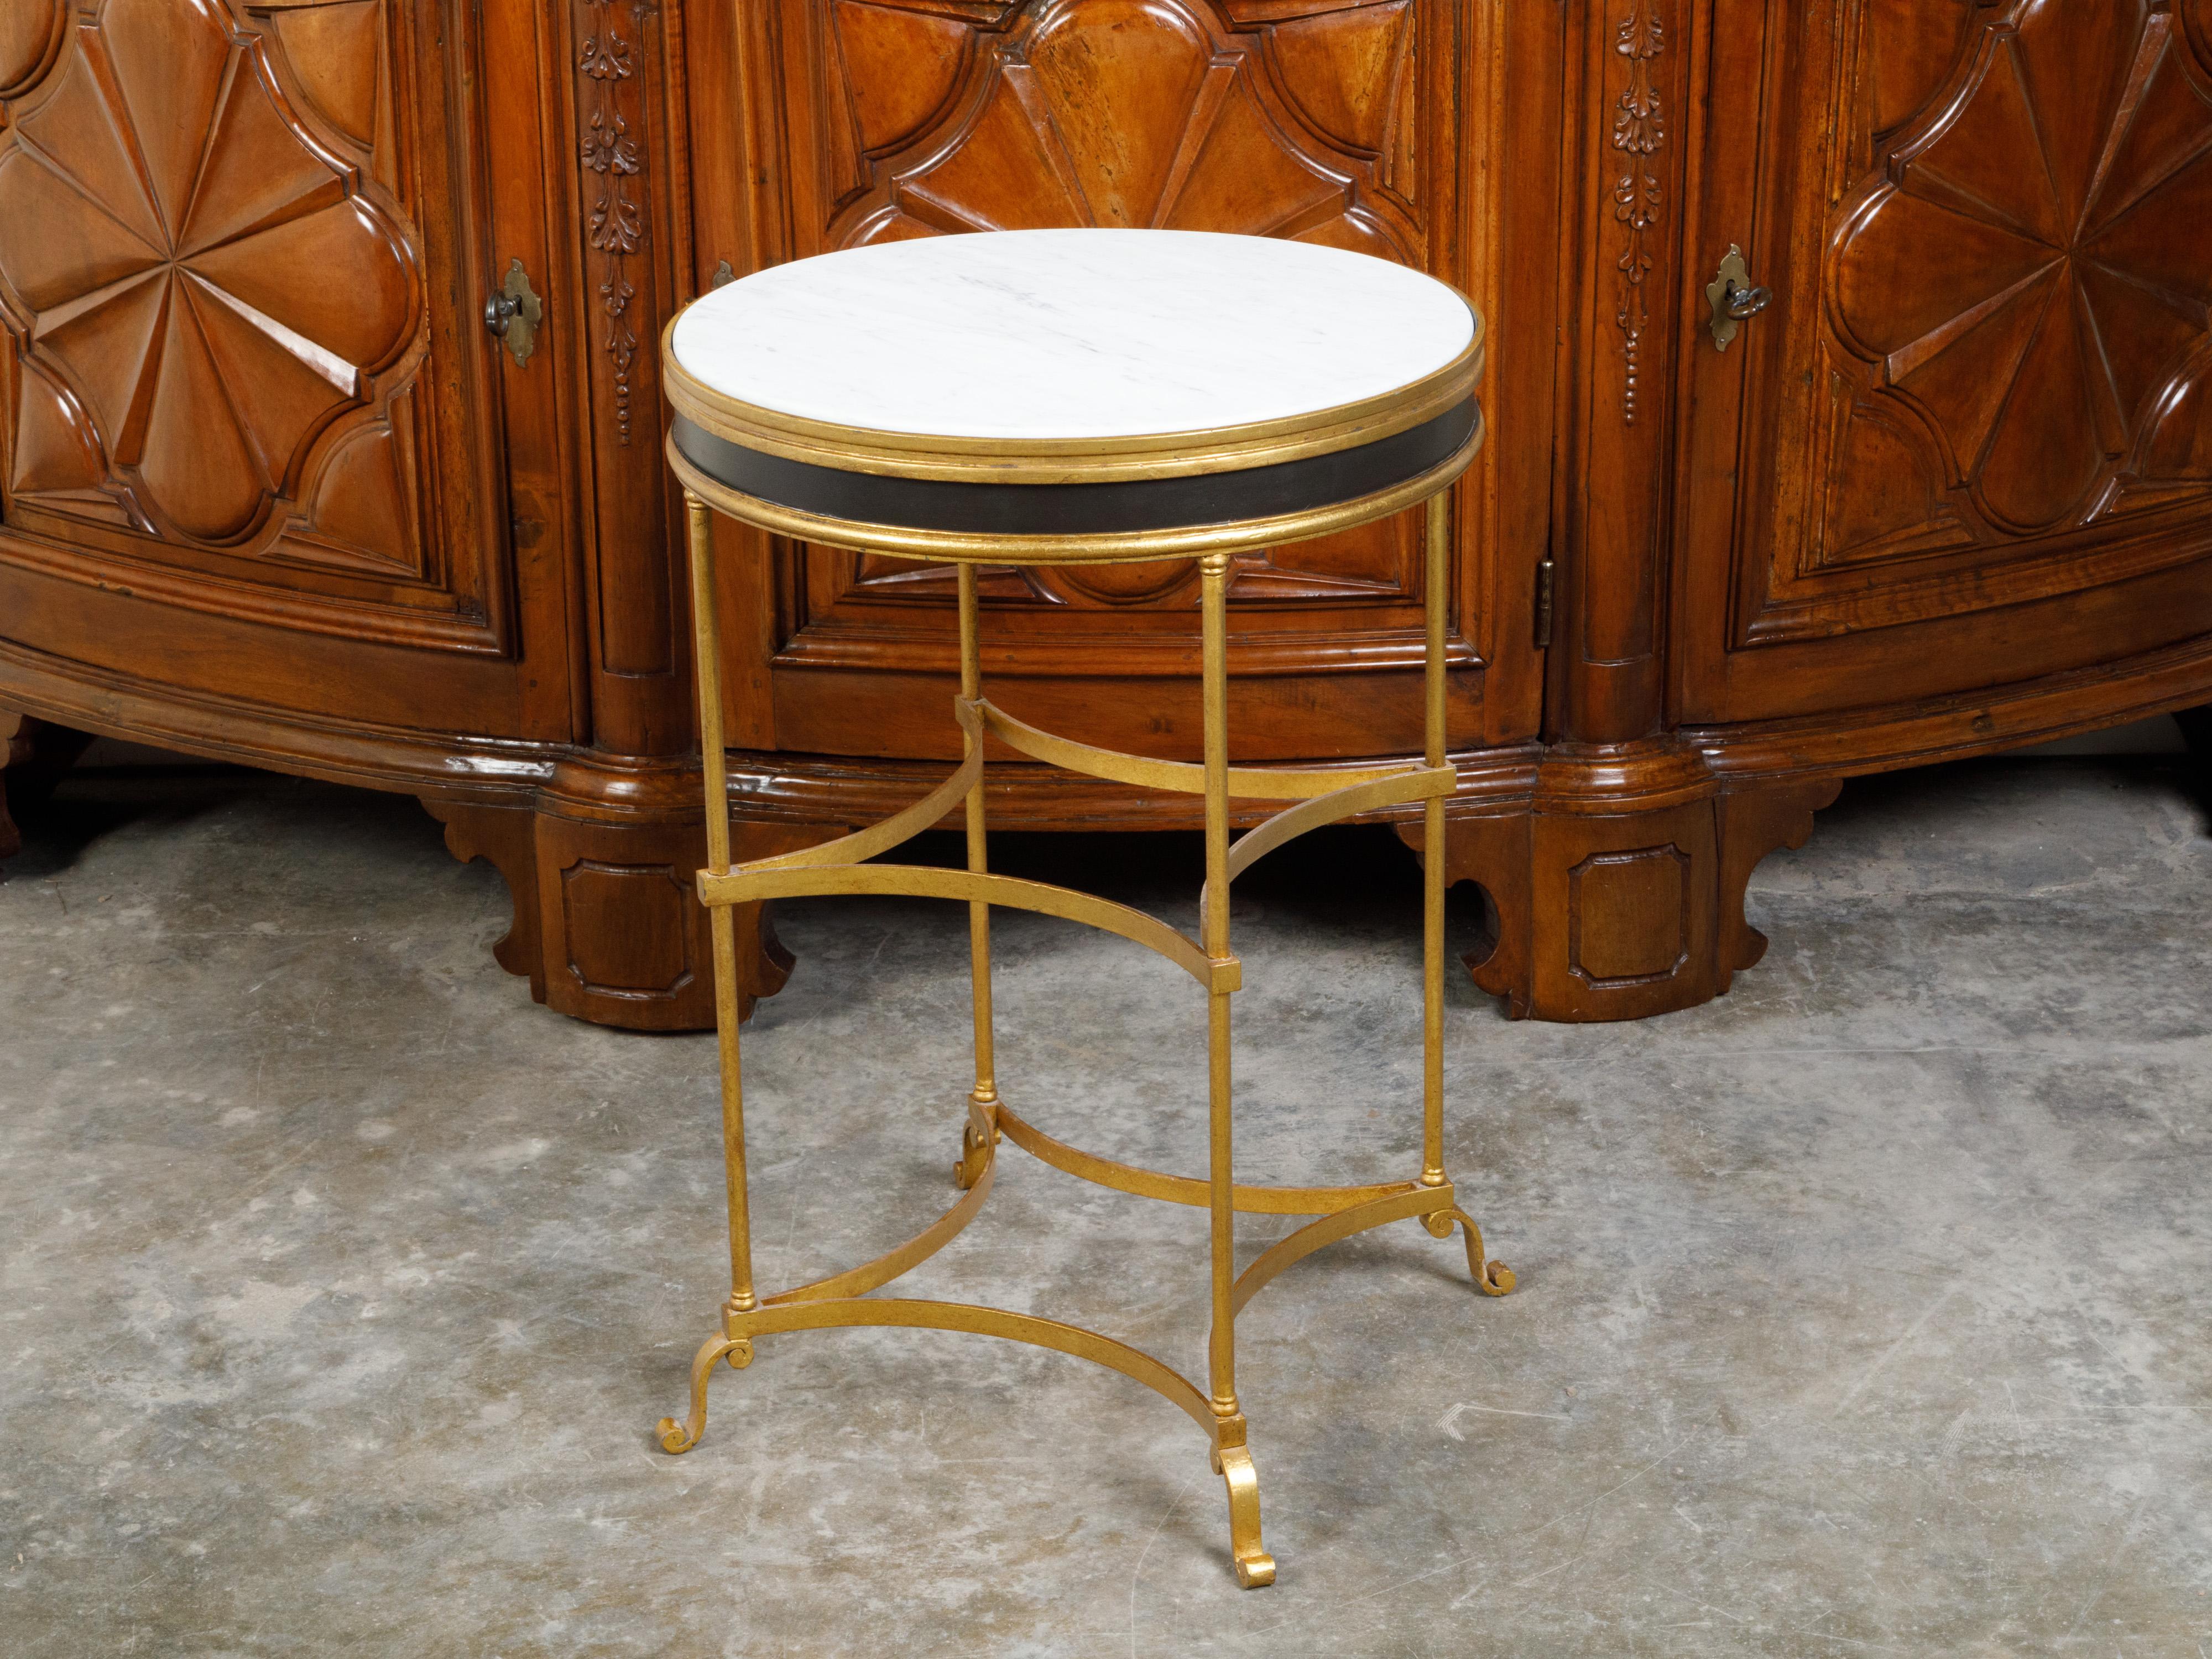 Italian Midcentury Gilt Metal Table with Marble Top and In-Curving Stretchers For Sale 1